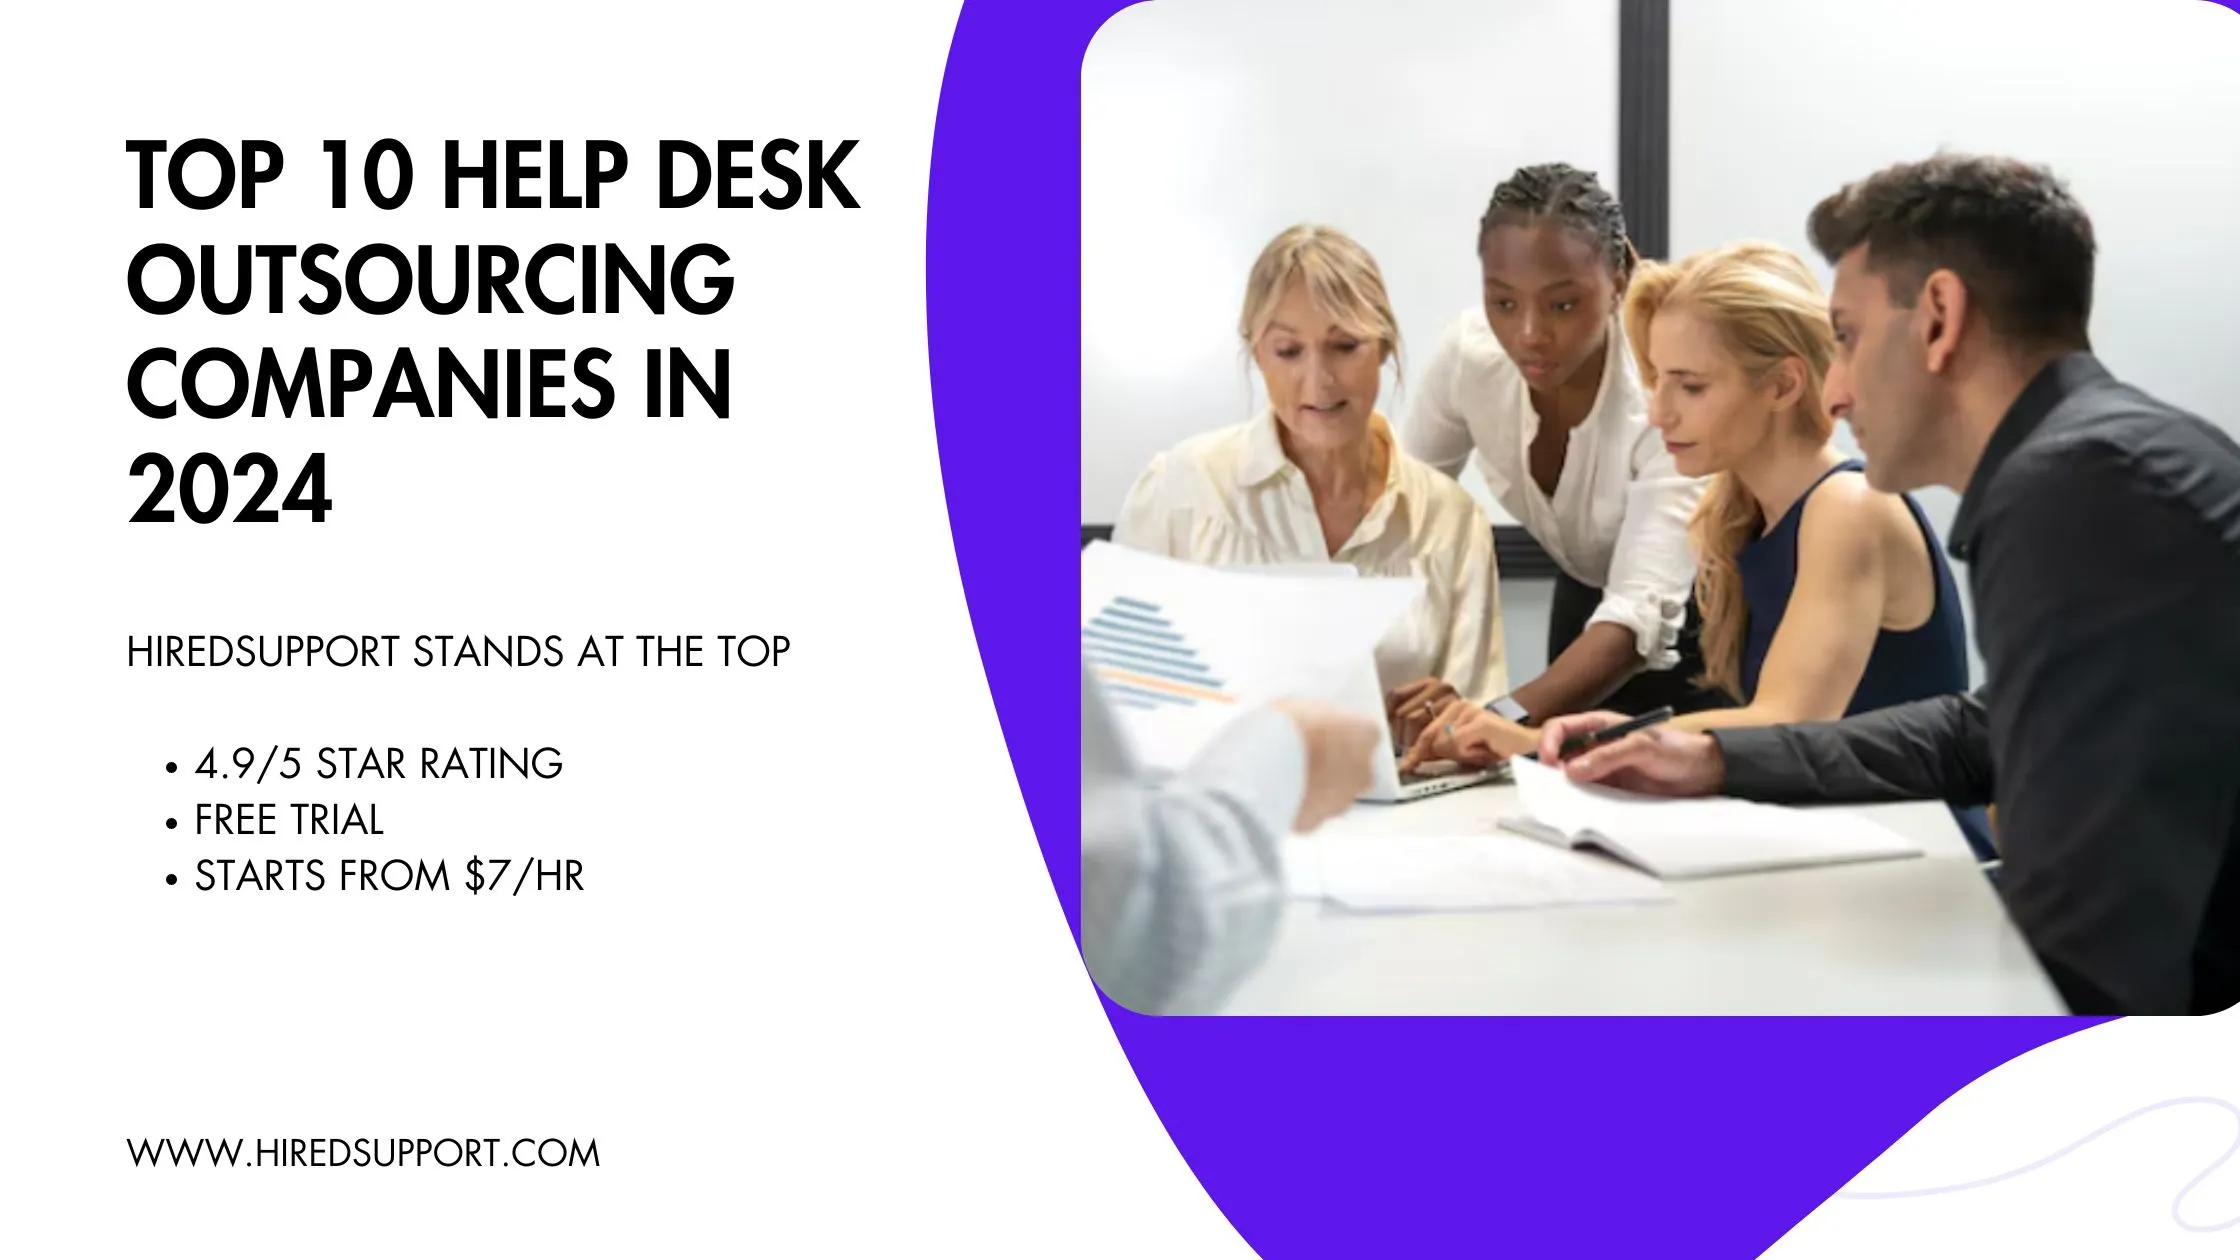 Top 10 Help Desk Outsourcing Companies in 2024